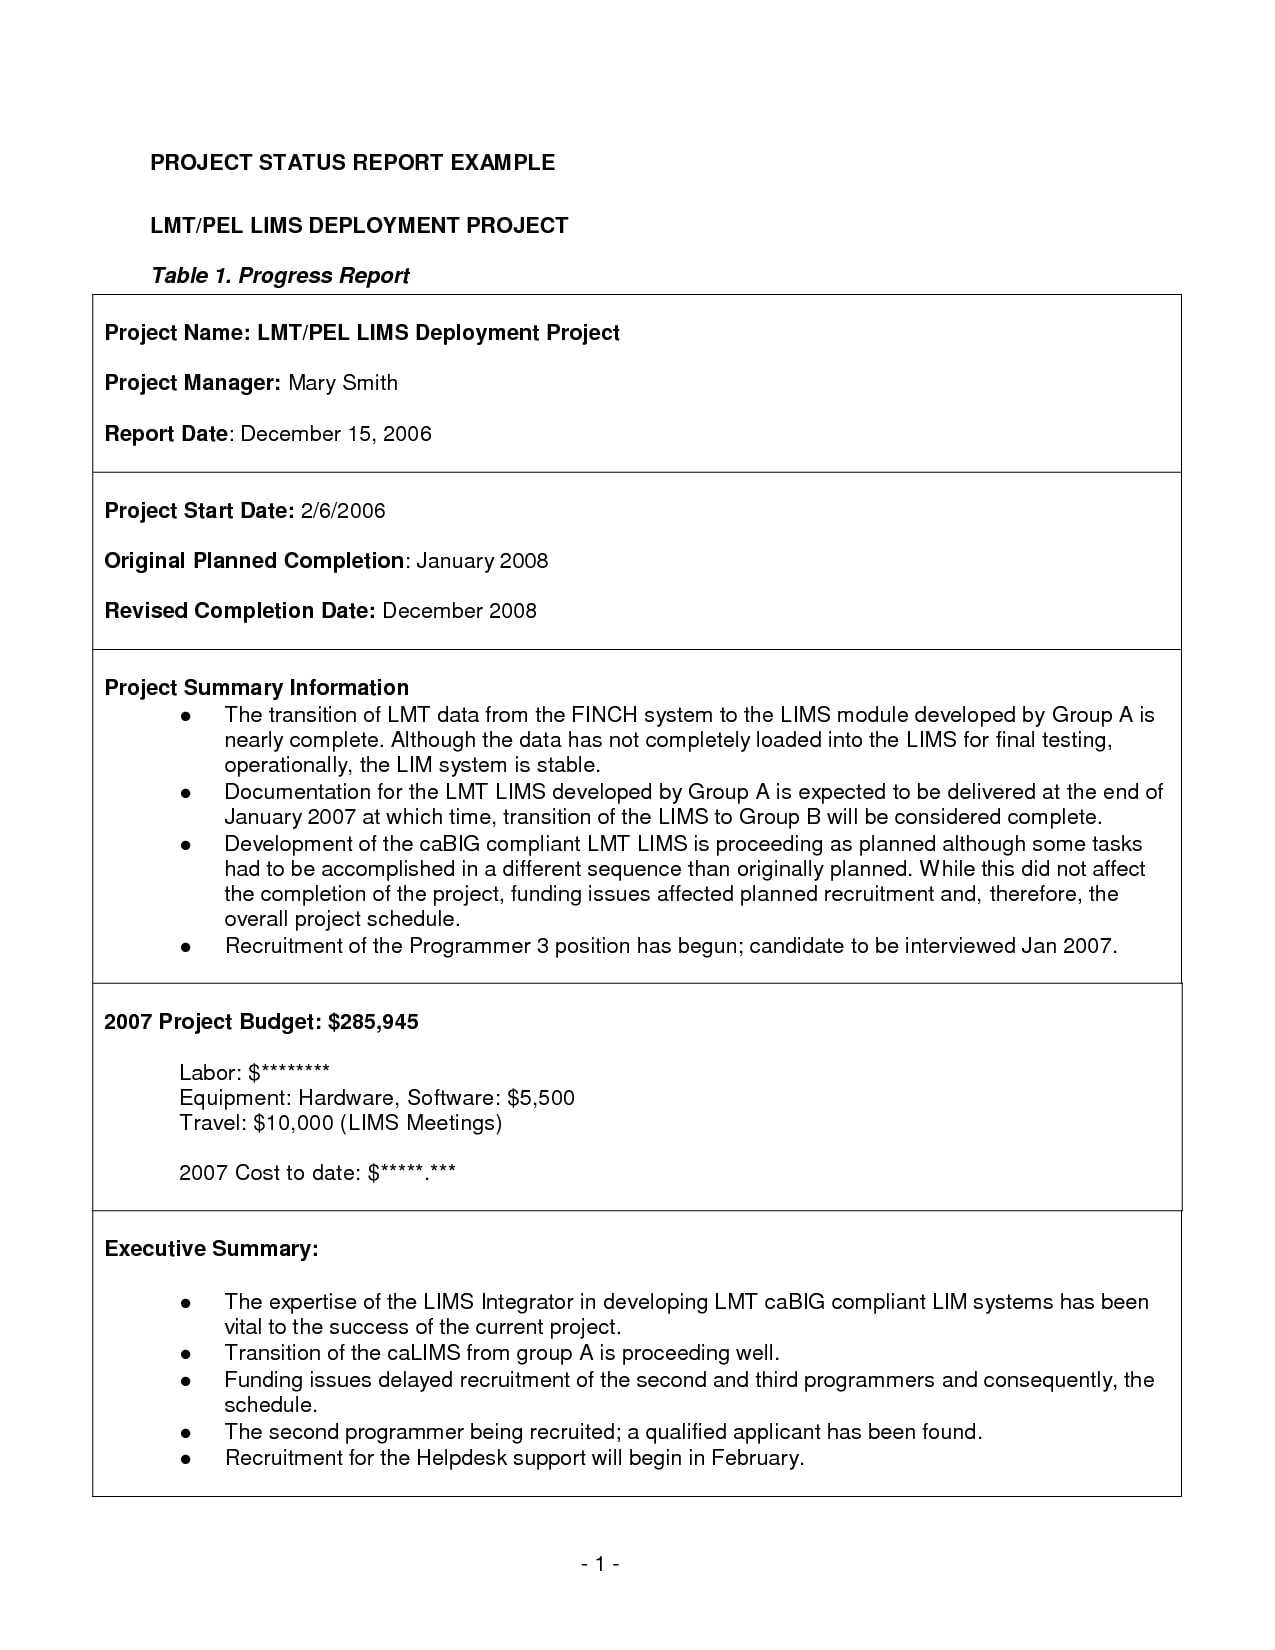 11+ Project Status Report Examples – Pdf | Examples For Executive Summary Project Status Report Template